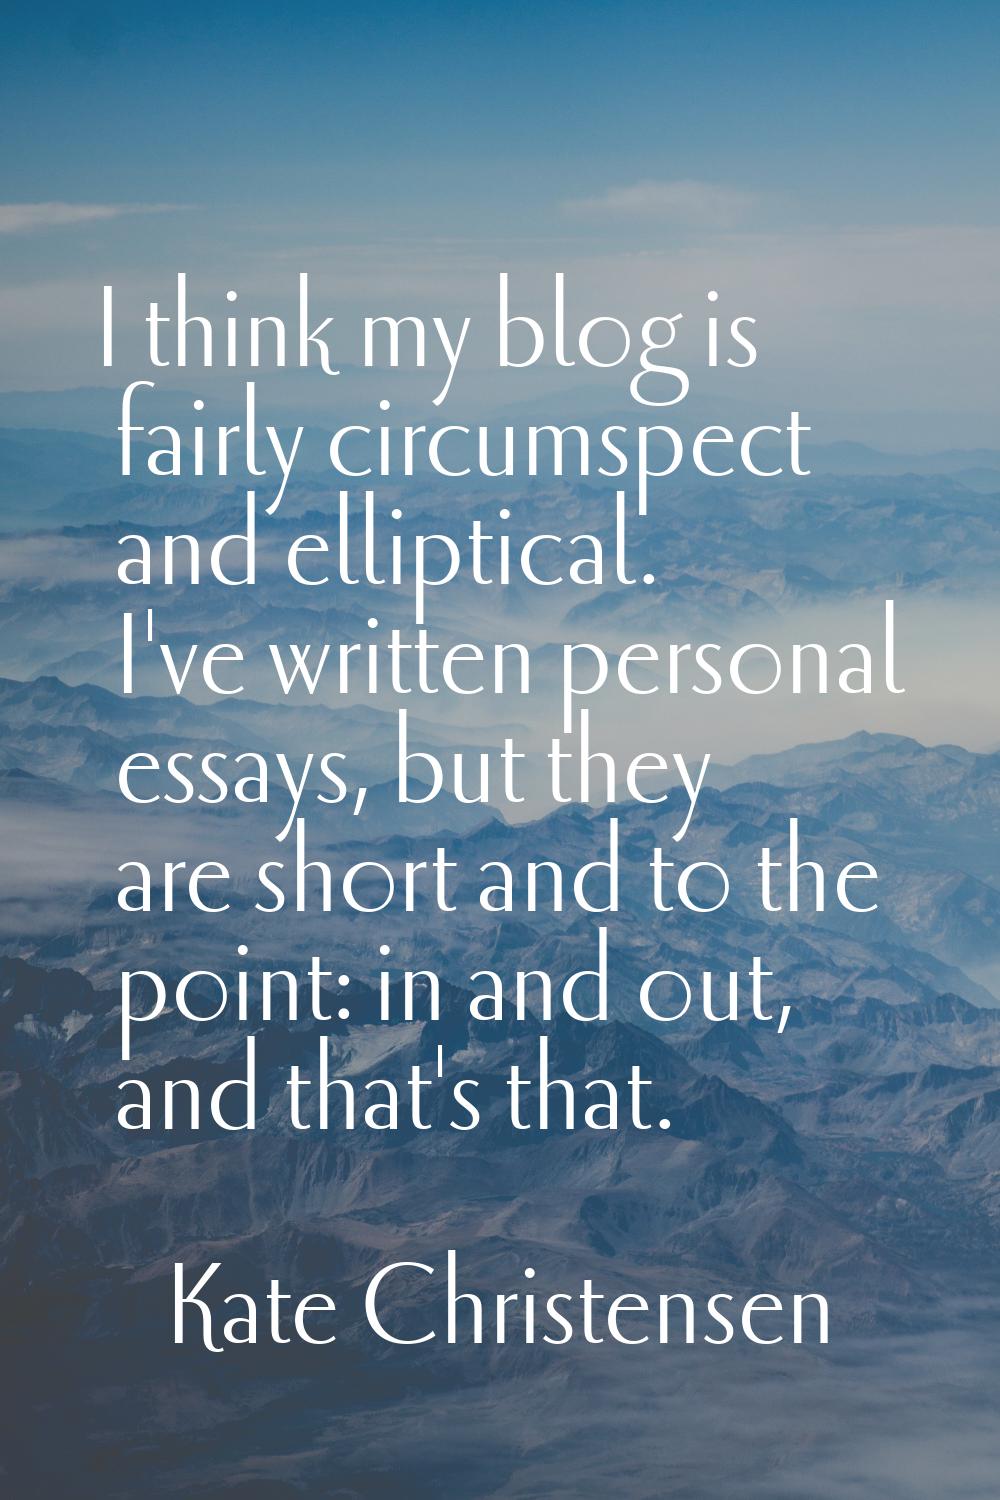 I think my blog is fairly circumspect and elliptical. I've written personal essays, but they are sh